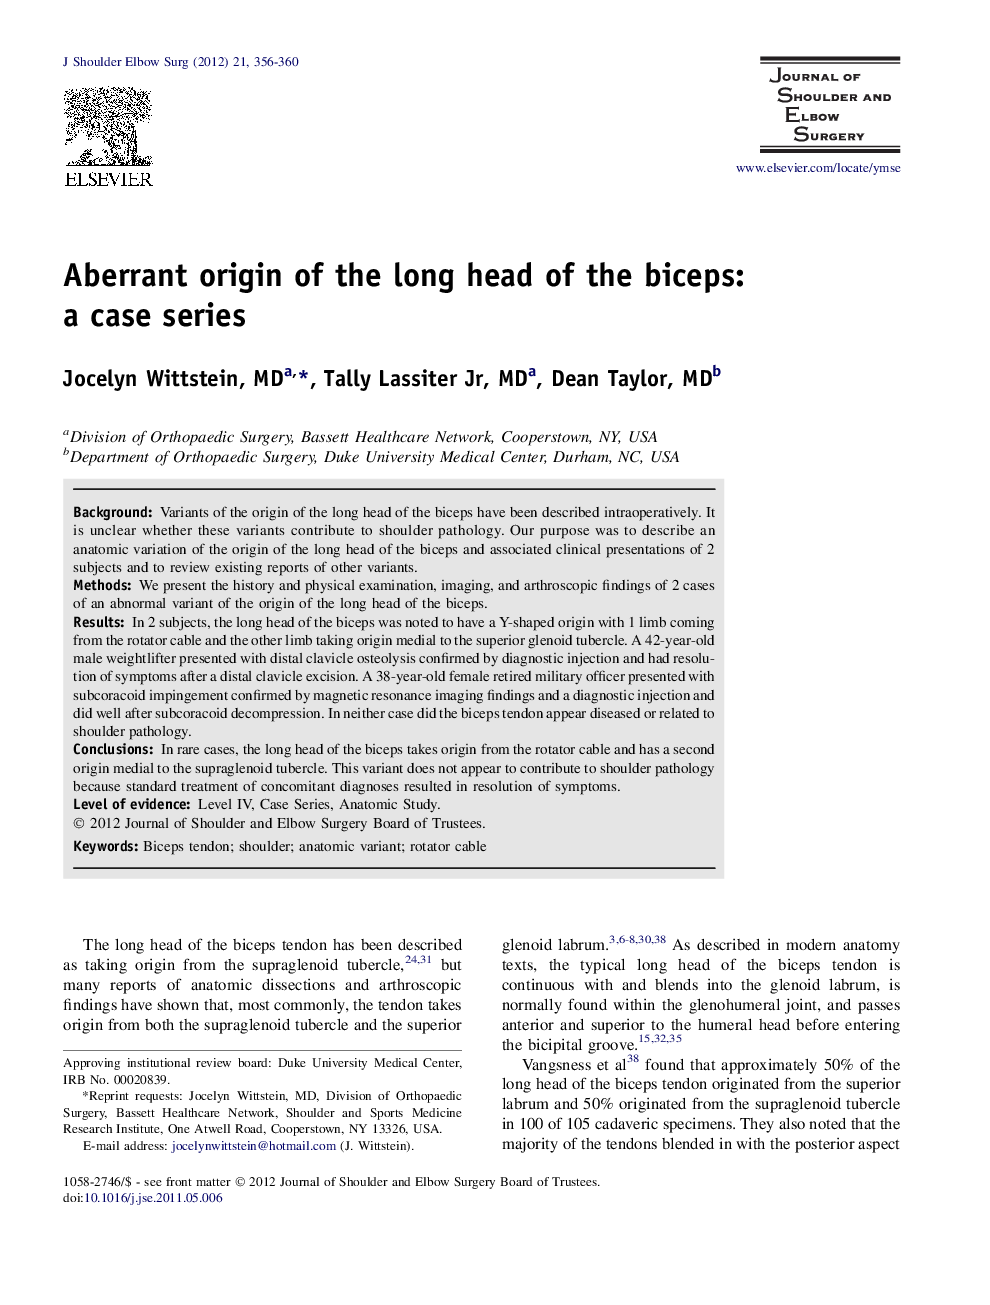 Aberrant origin of the long head of the biceps: a case series